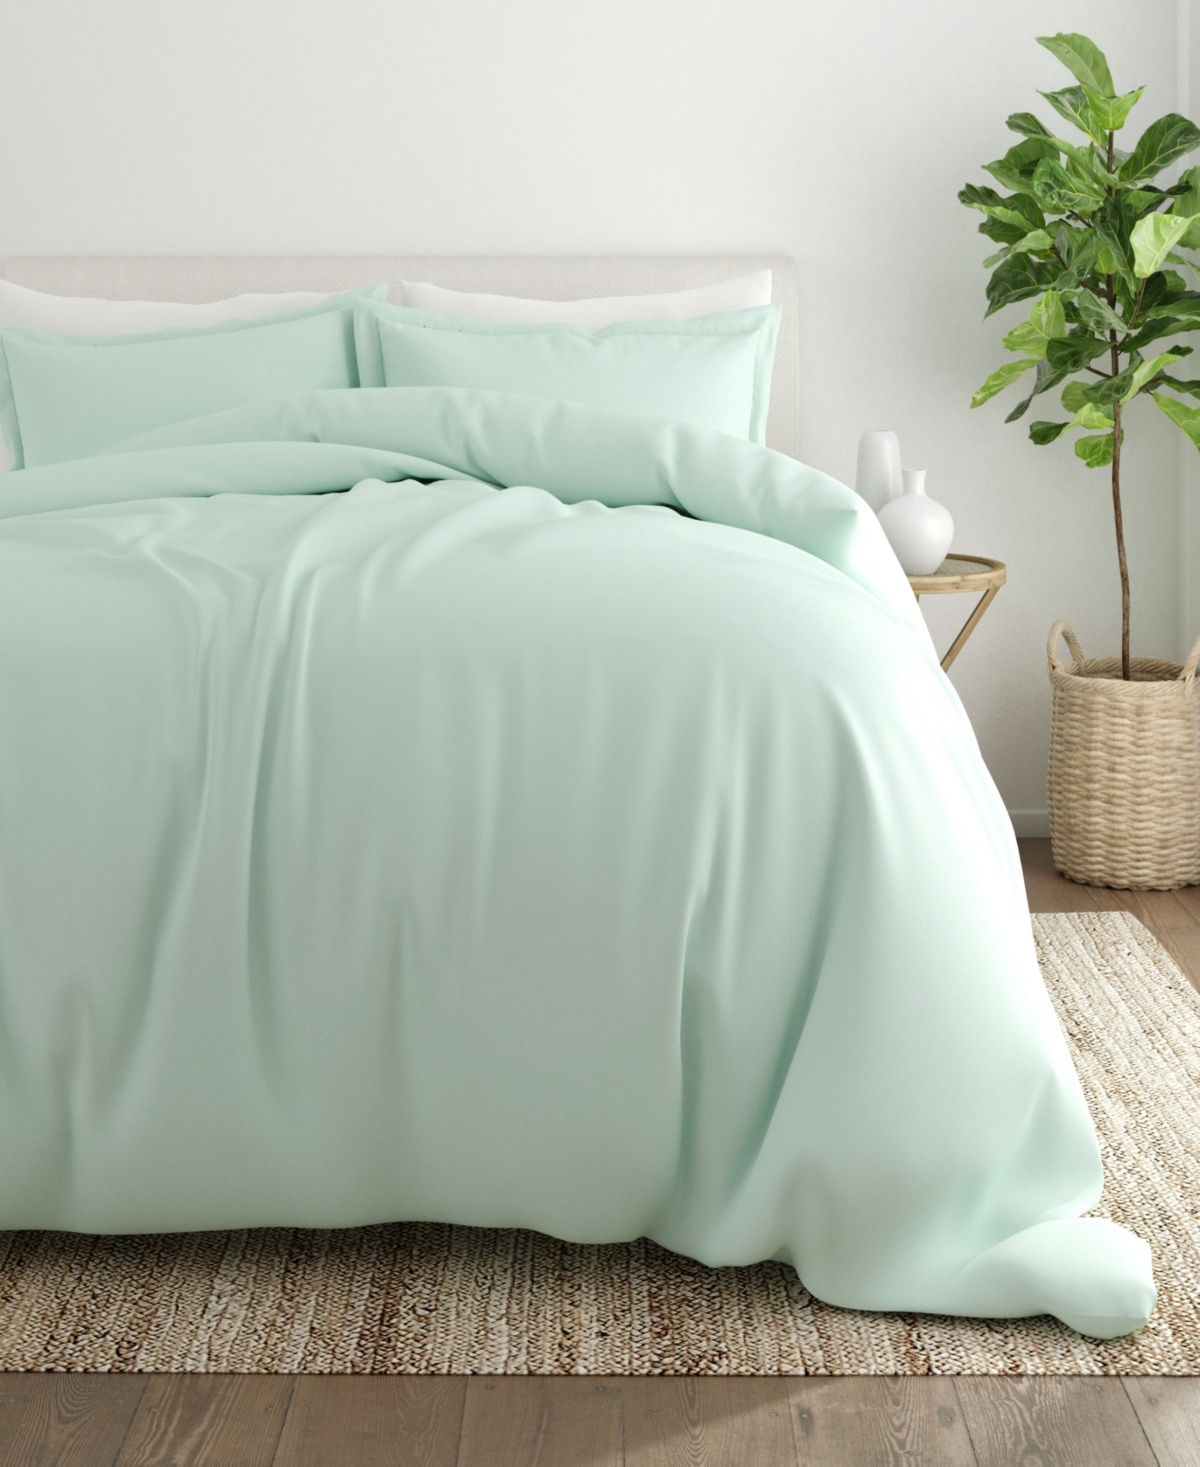 Ienjoy Home Dynamically Dashing Duvet Cover Set By The Home Collection, King/california King In Mint